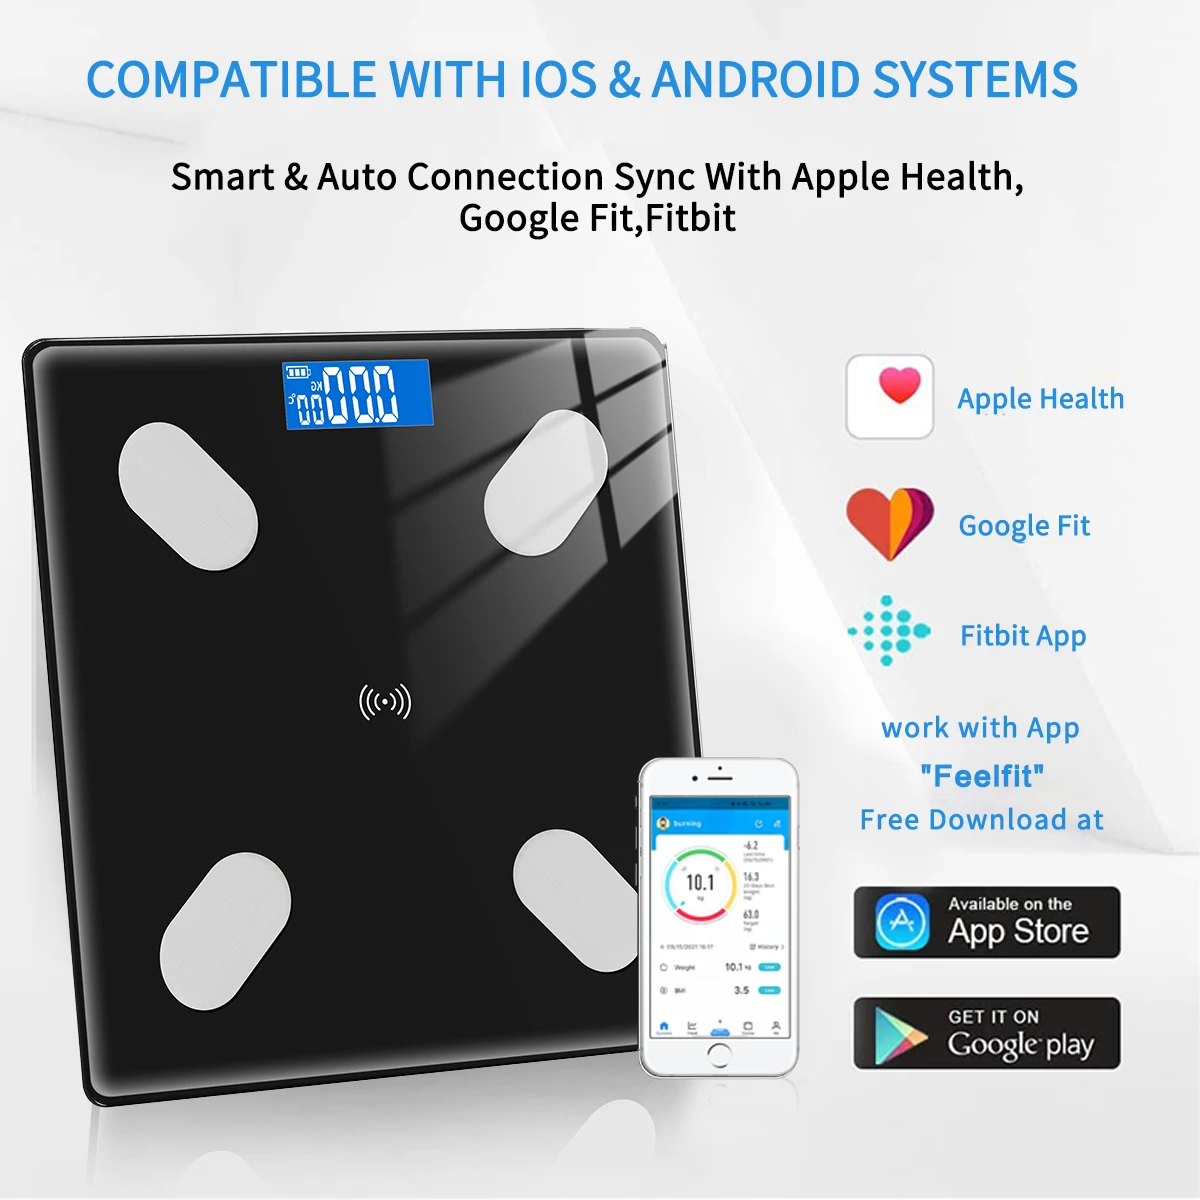 White 35*40*5 Sync Data with Apple Health 1 BY ONE Bluetooth Smart Body Fat Scale Body Composition Analyzer Bathroom Digital Weight Scale with Android iOS App Google Fit & Fitbit APP 